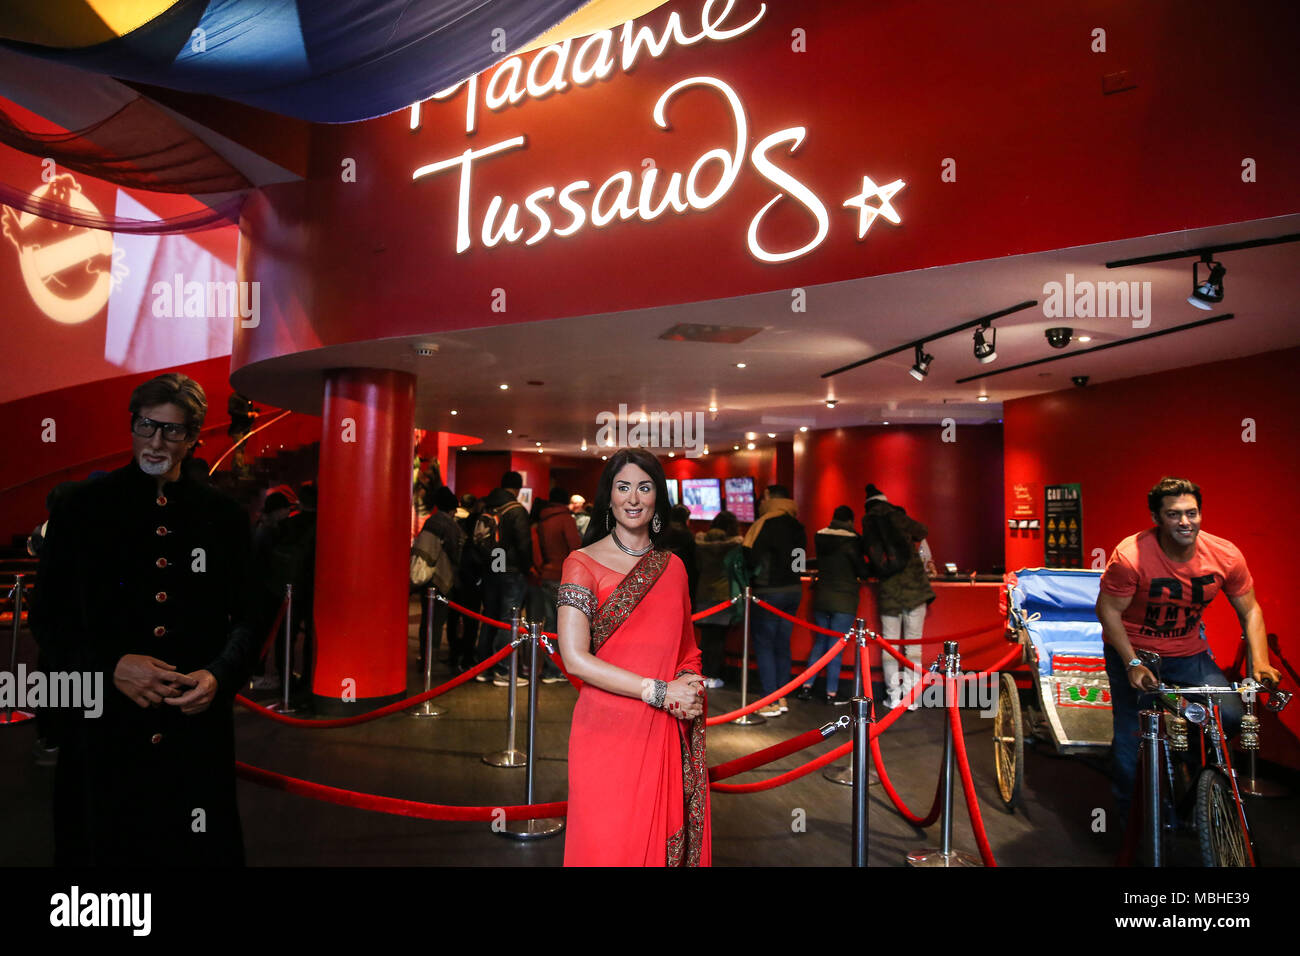 View of the Bollywood Experience, a space dedicated to Indian cinema at Madame Tussauds New York in the United States this Tuesday, 10. Visitors will come face to face with some of the most India's iconic stars including Shah Rukh Khan, Ashwarya Rai, Amitabh Bachchan, Kareena Kappor, Hrithik Roshan, Salman Khan, Katrina Kaif and Madhuri Dixit. Celebrating all things, Bollywood, vibrant art installations, projections and music will bring the experience to life. (PHOTO: WILLIAM VOLCOV/BRAZIL PHOTO PRESS) Stock Photo